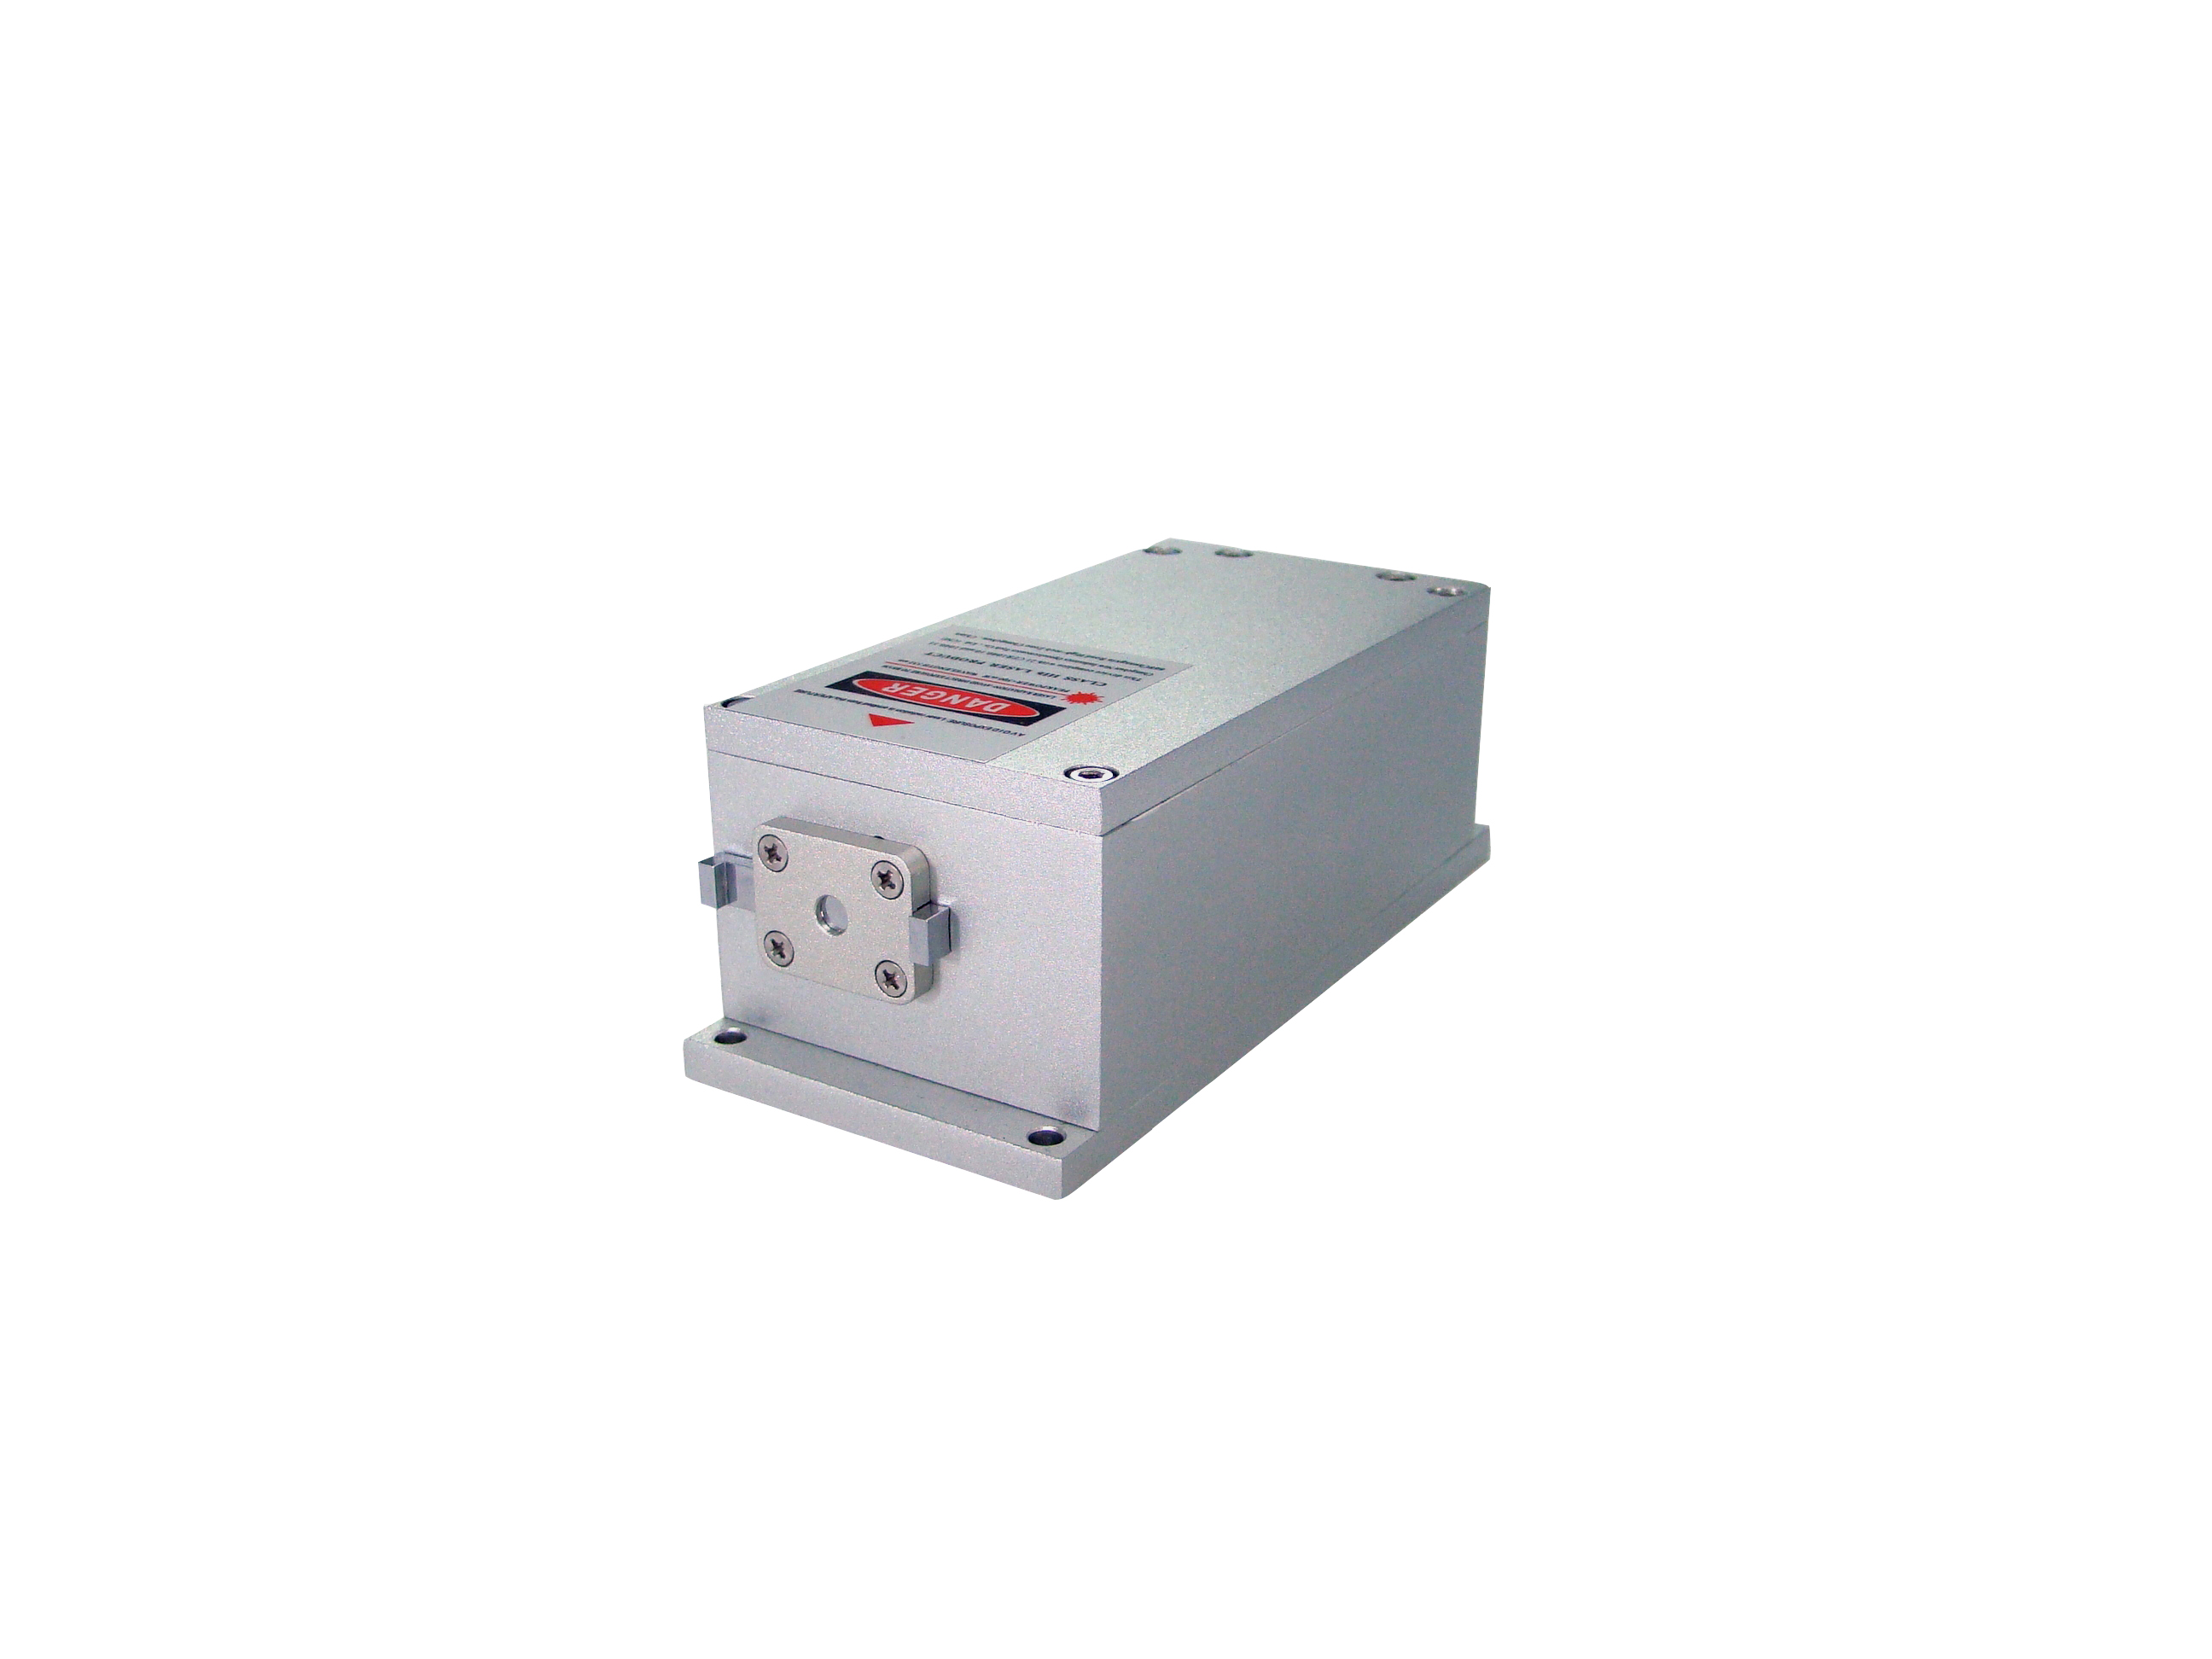 CNI good beam profile high reliability diode lasers